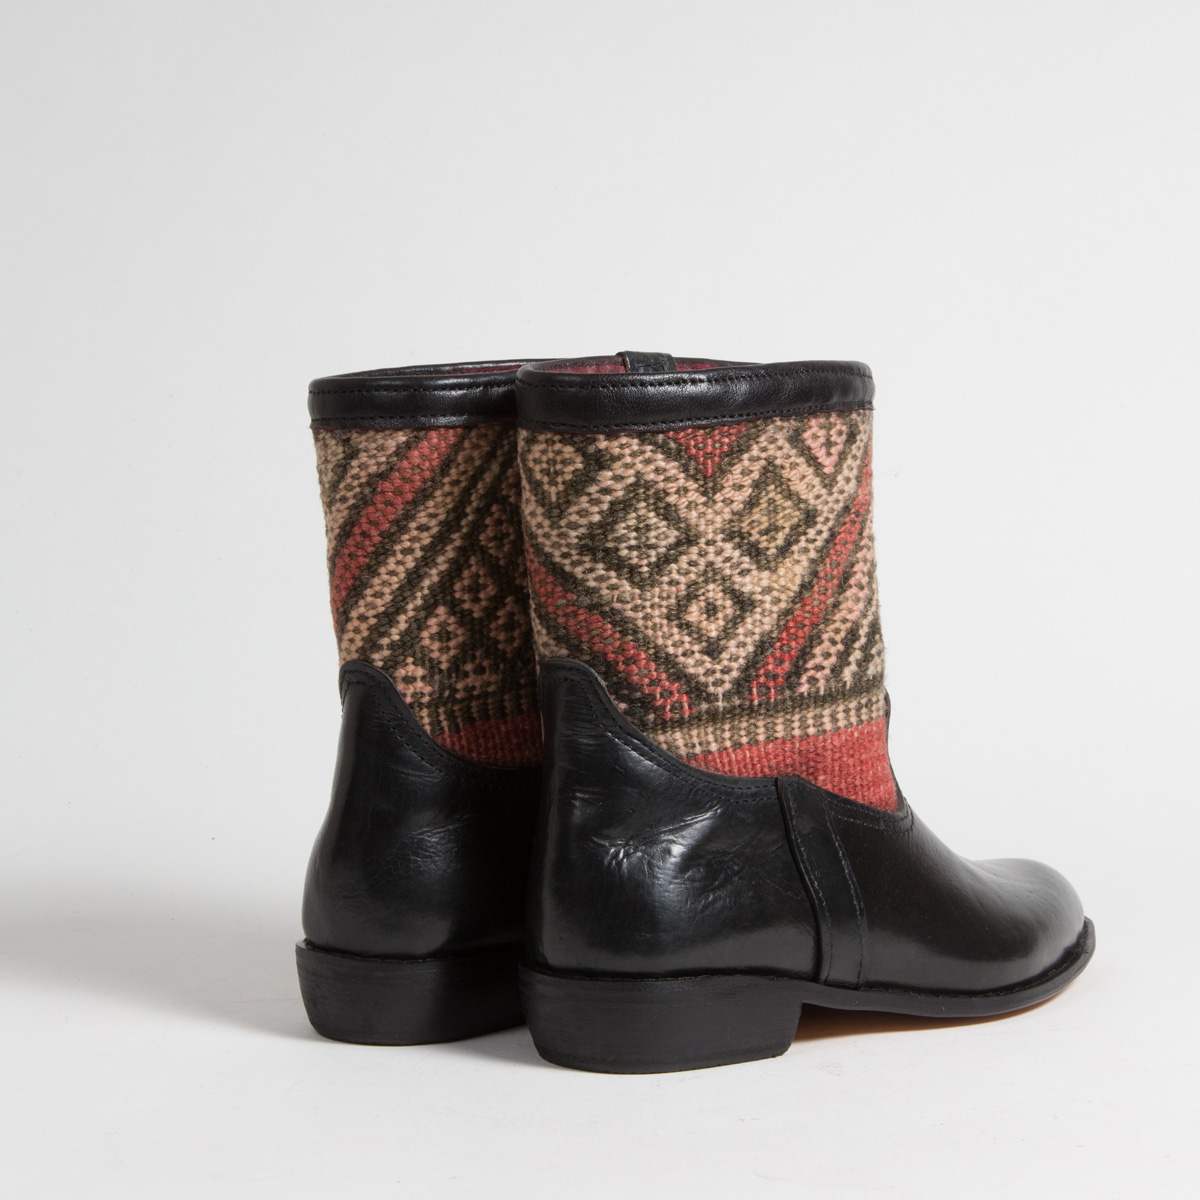 Bottines Kilim cuir mababouche artisanales (Réf. RPN26-41)